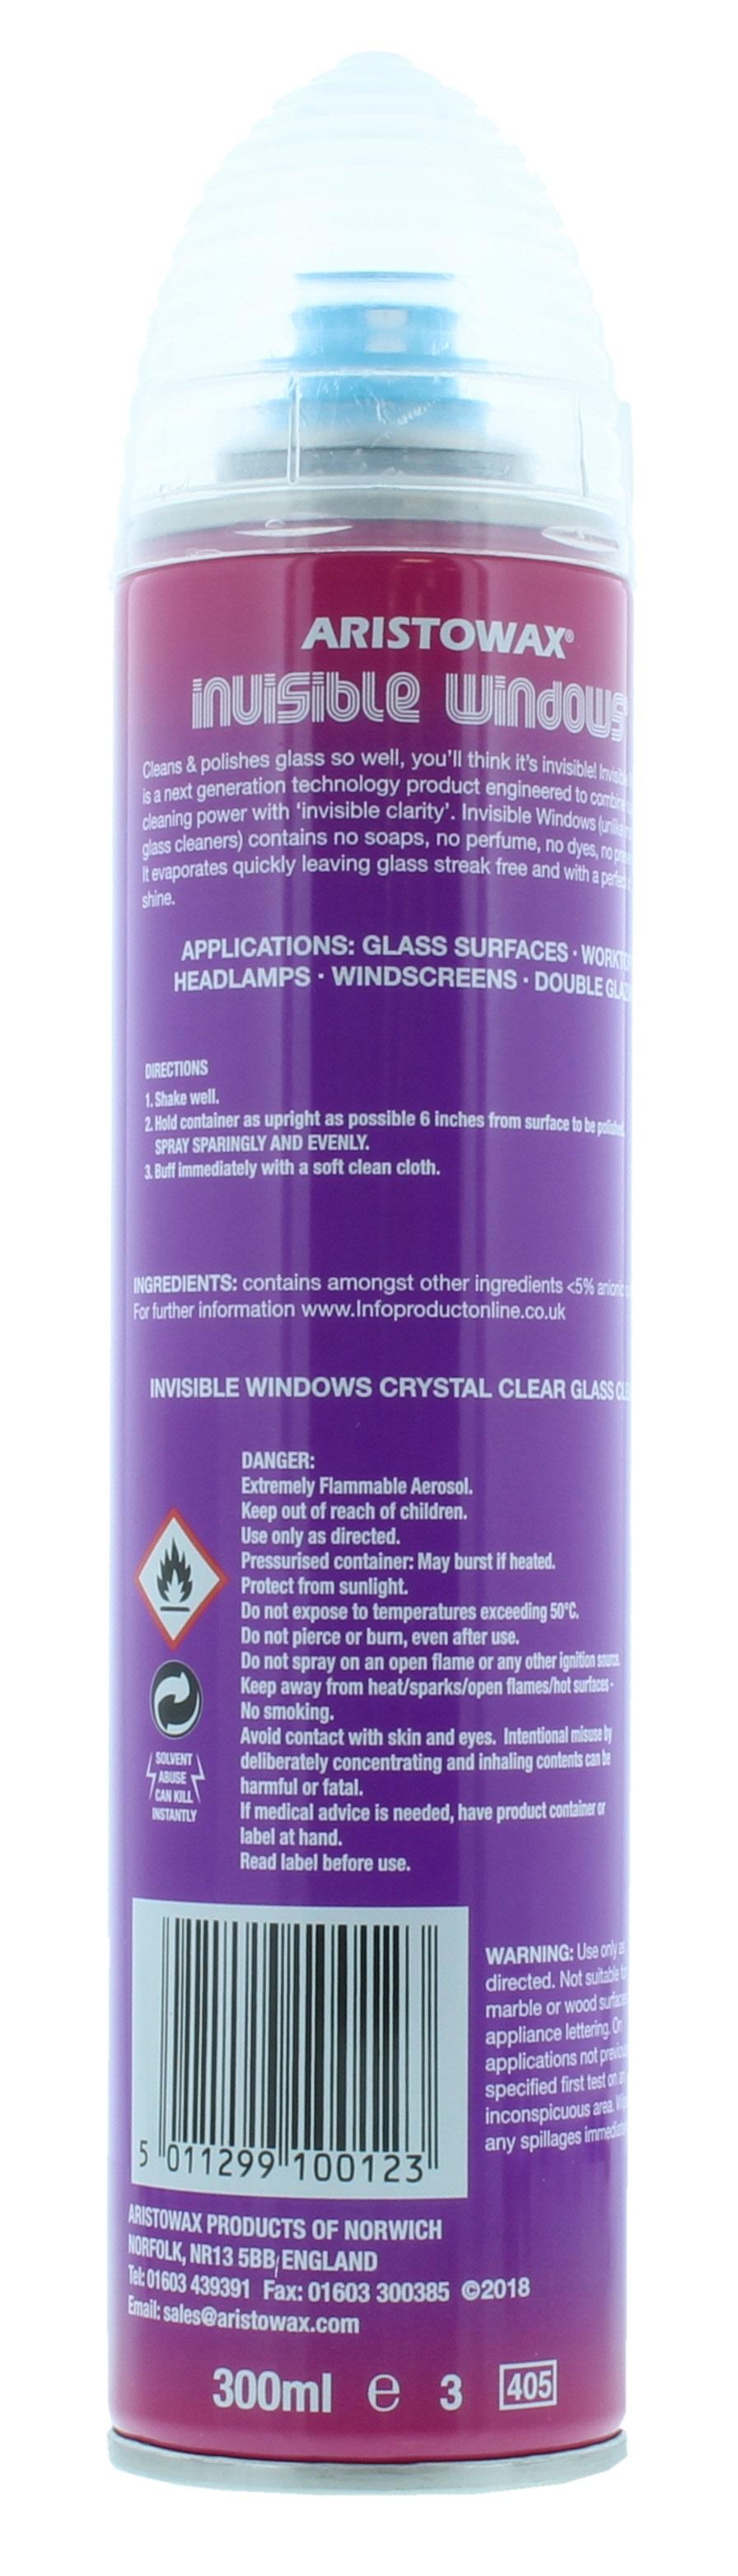 Aristowax Invisible Window Crystal Clear Foaming Glass Cleaners Spray 300ml